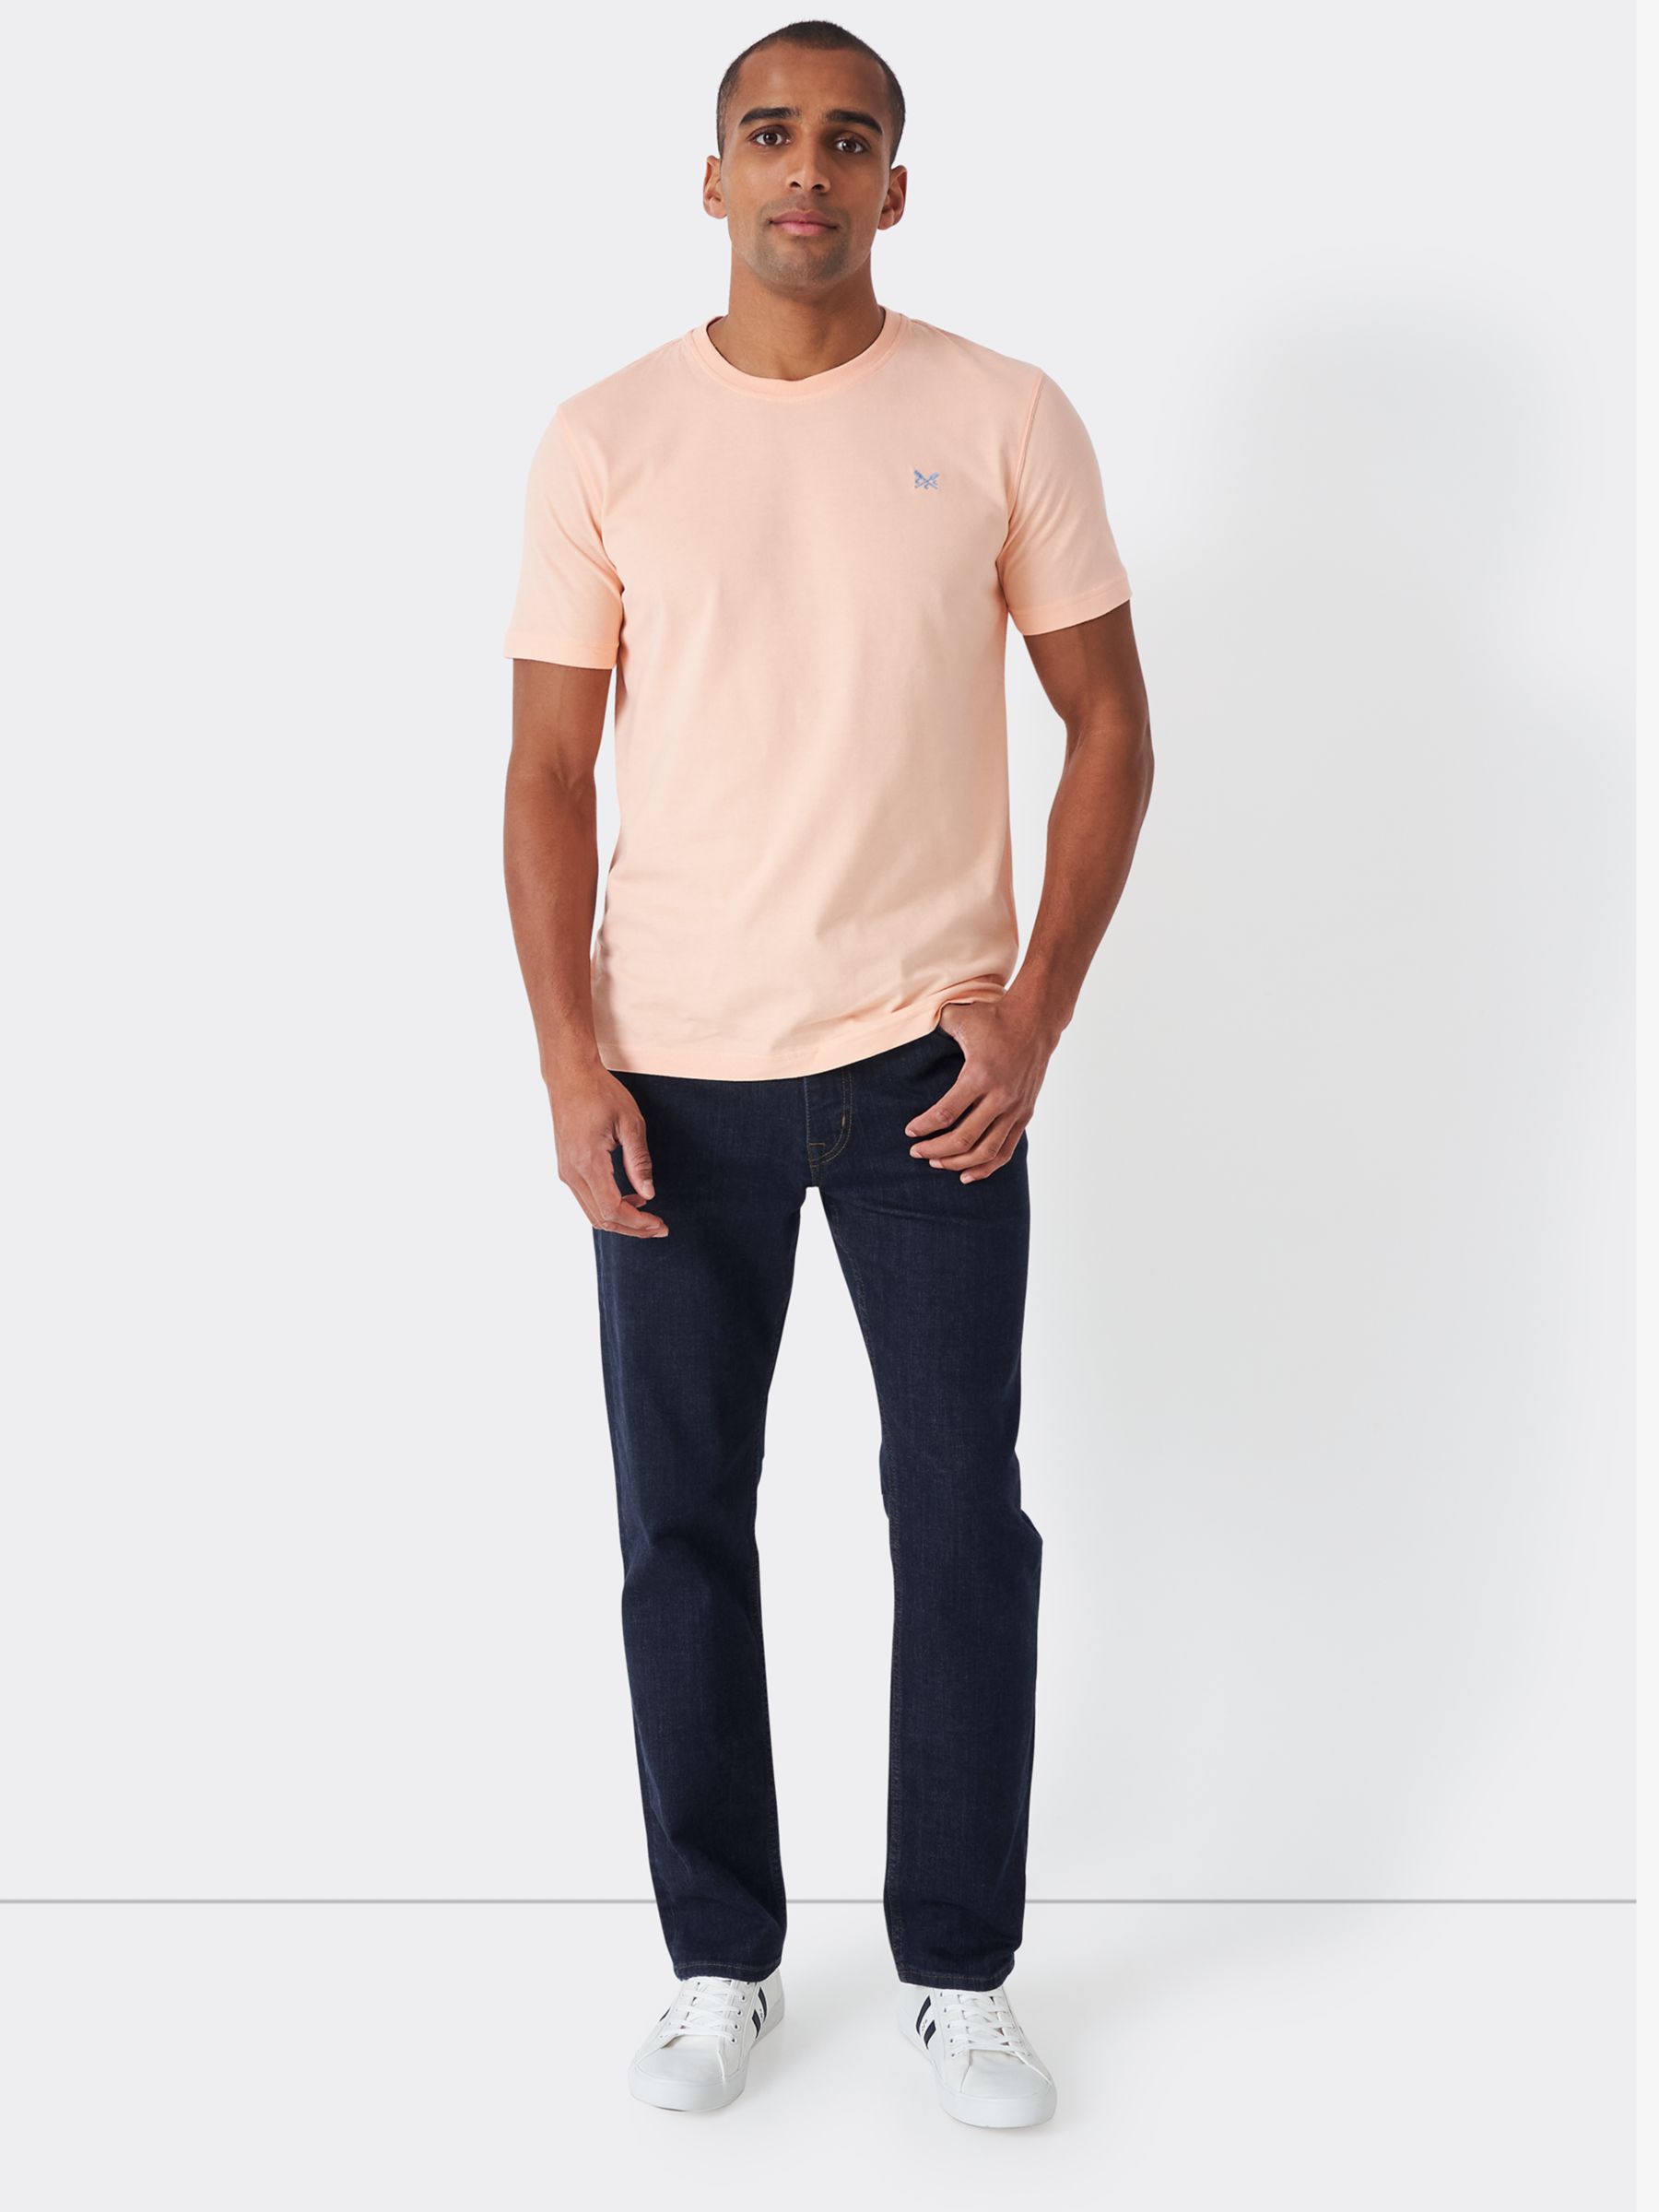 Buy Crew Clothing Parker Straight Leg Jeans Online at johnlewis.com